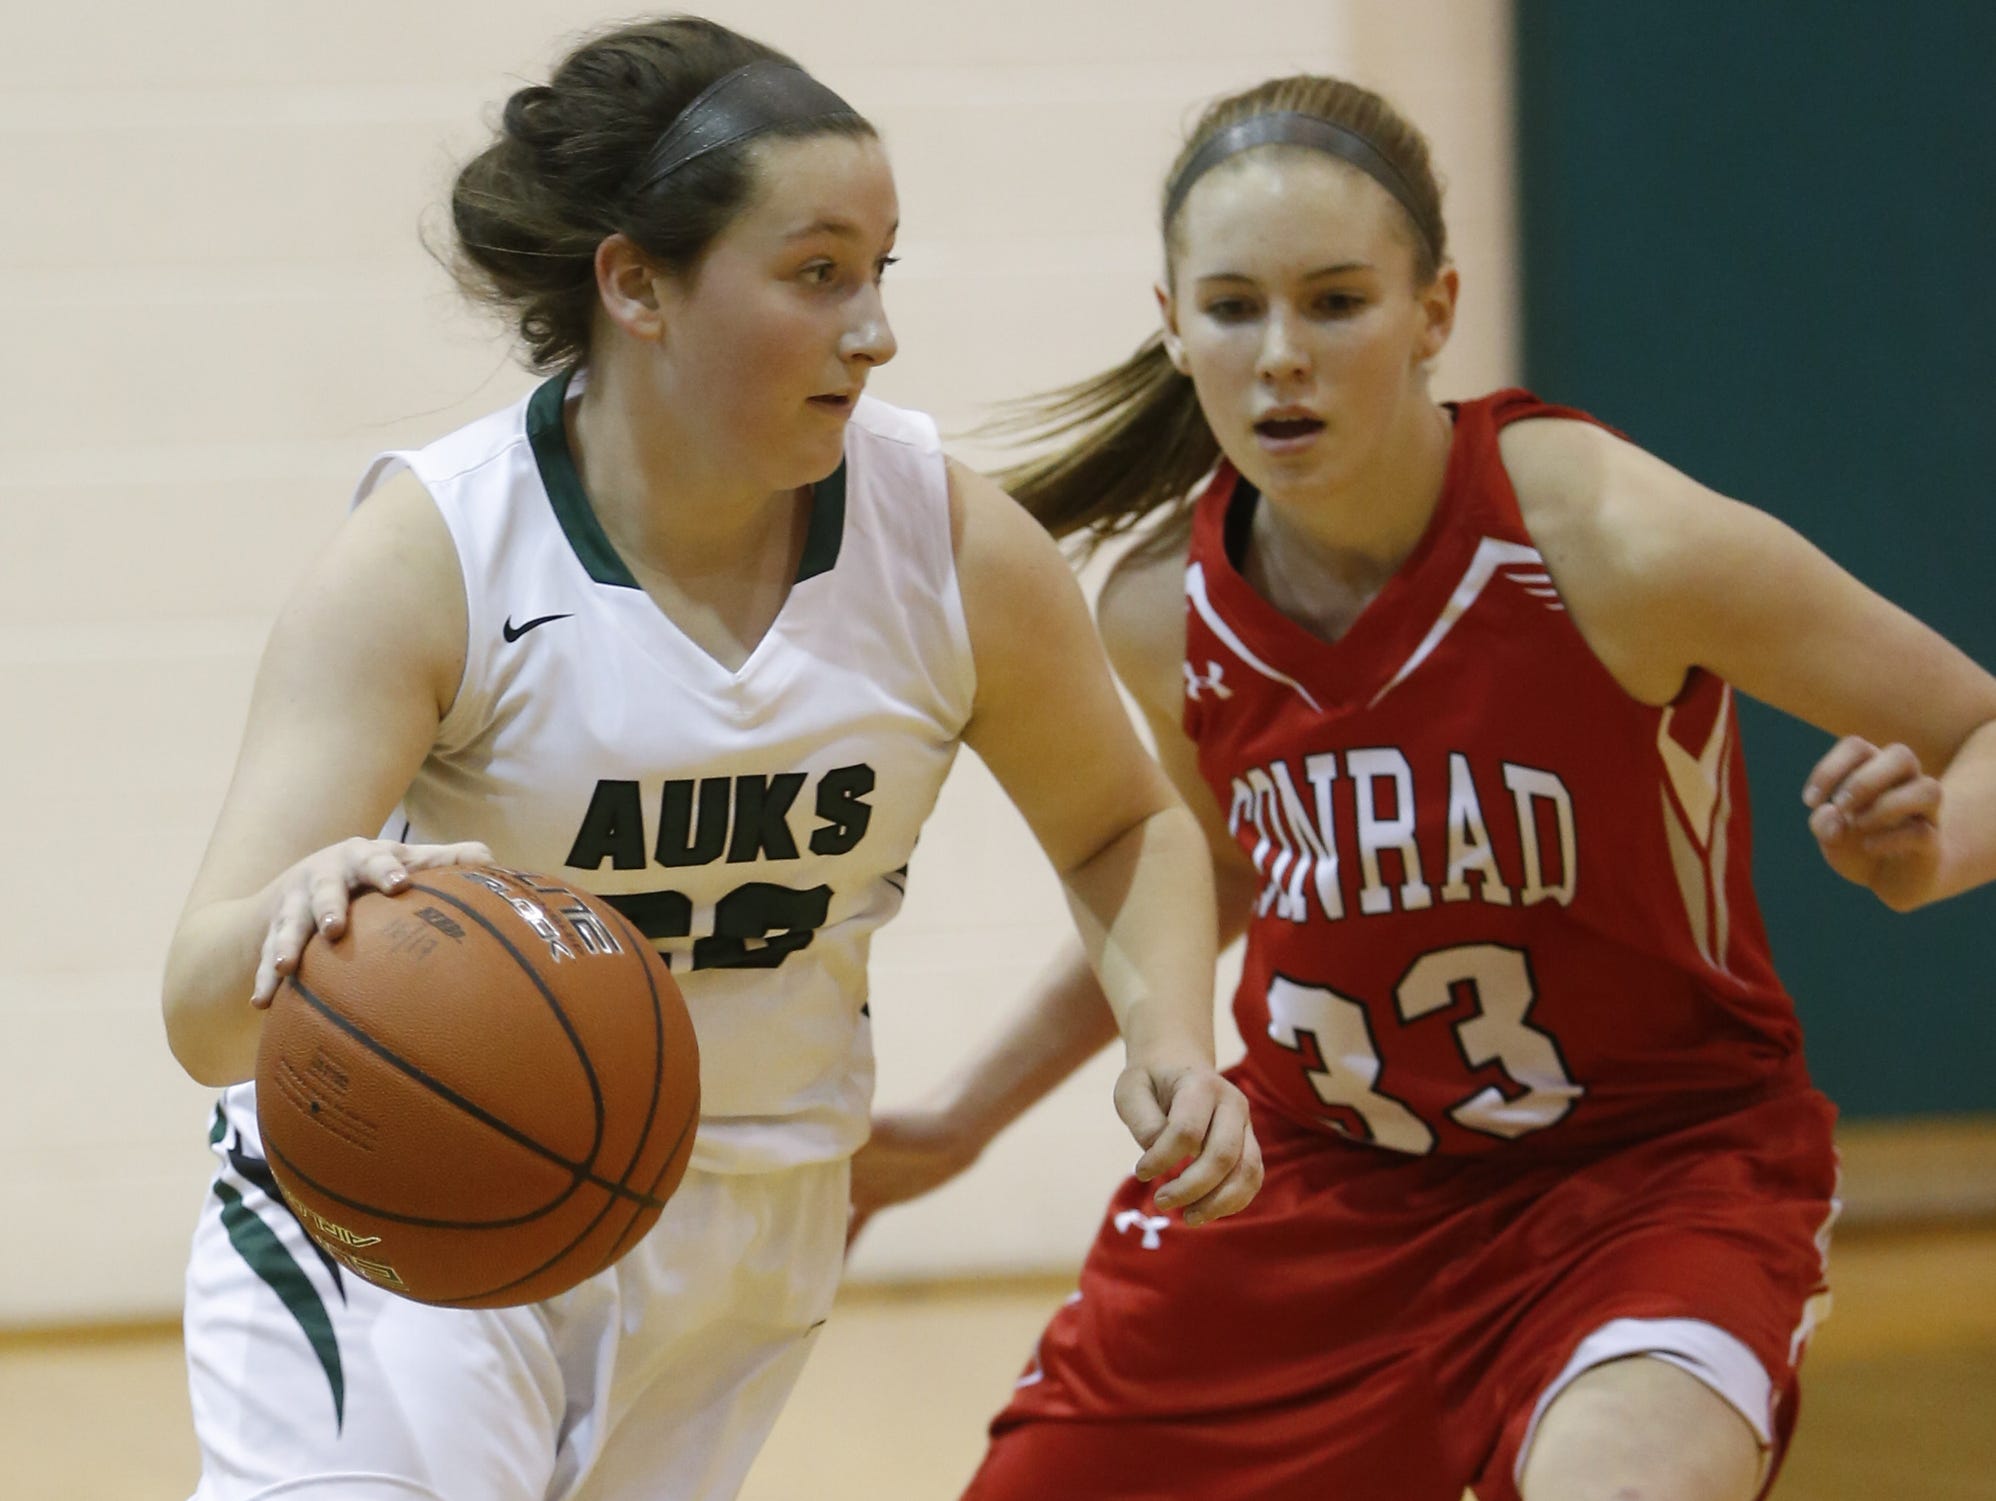 Archmere's Emma McCann (22), seen here against Conrad, led her team with nine points as the Auks defeated Wilmington Friends 34-26 in the first round of the DIAA girls basketball tournament on Tuesday.